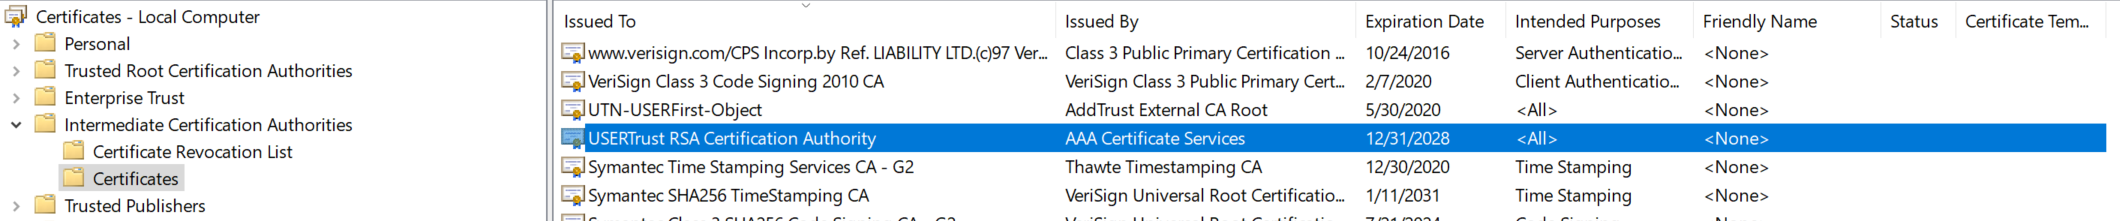 USERTrust RSA Certification Authority listed in Certificate Management